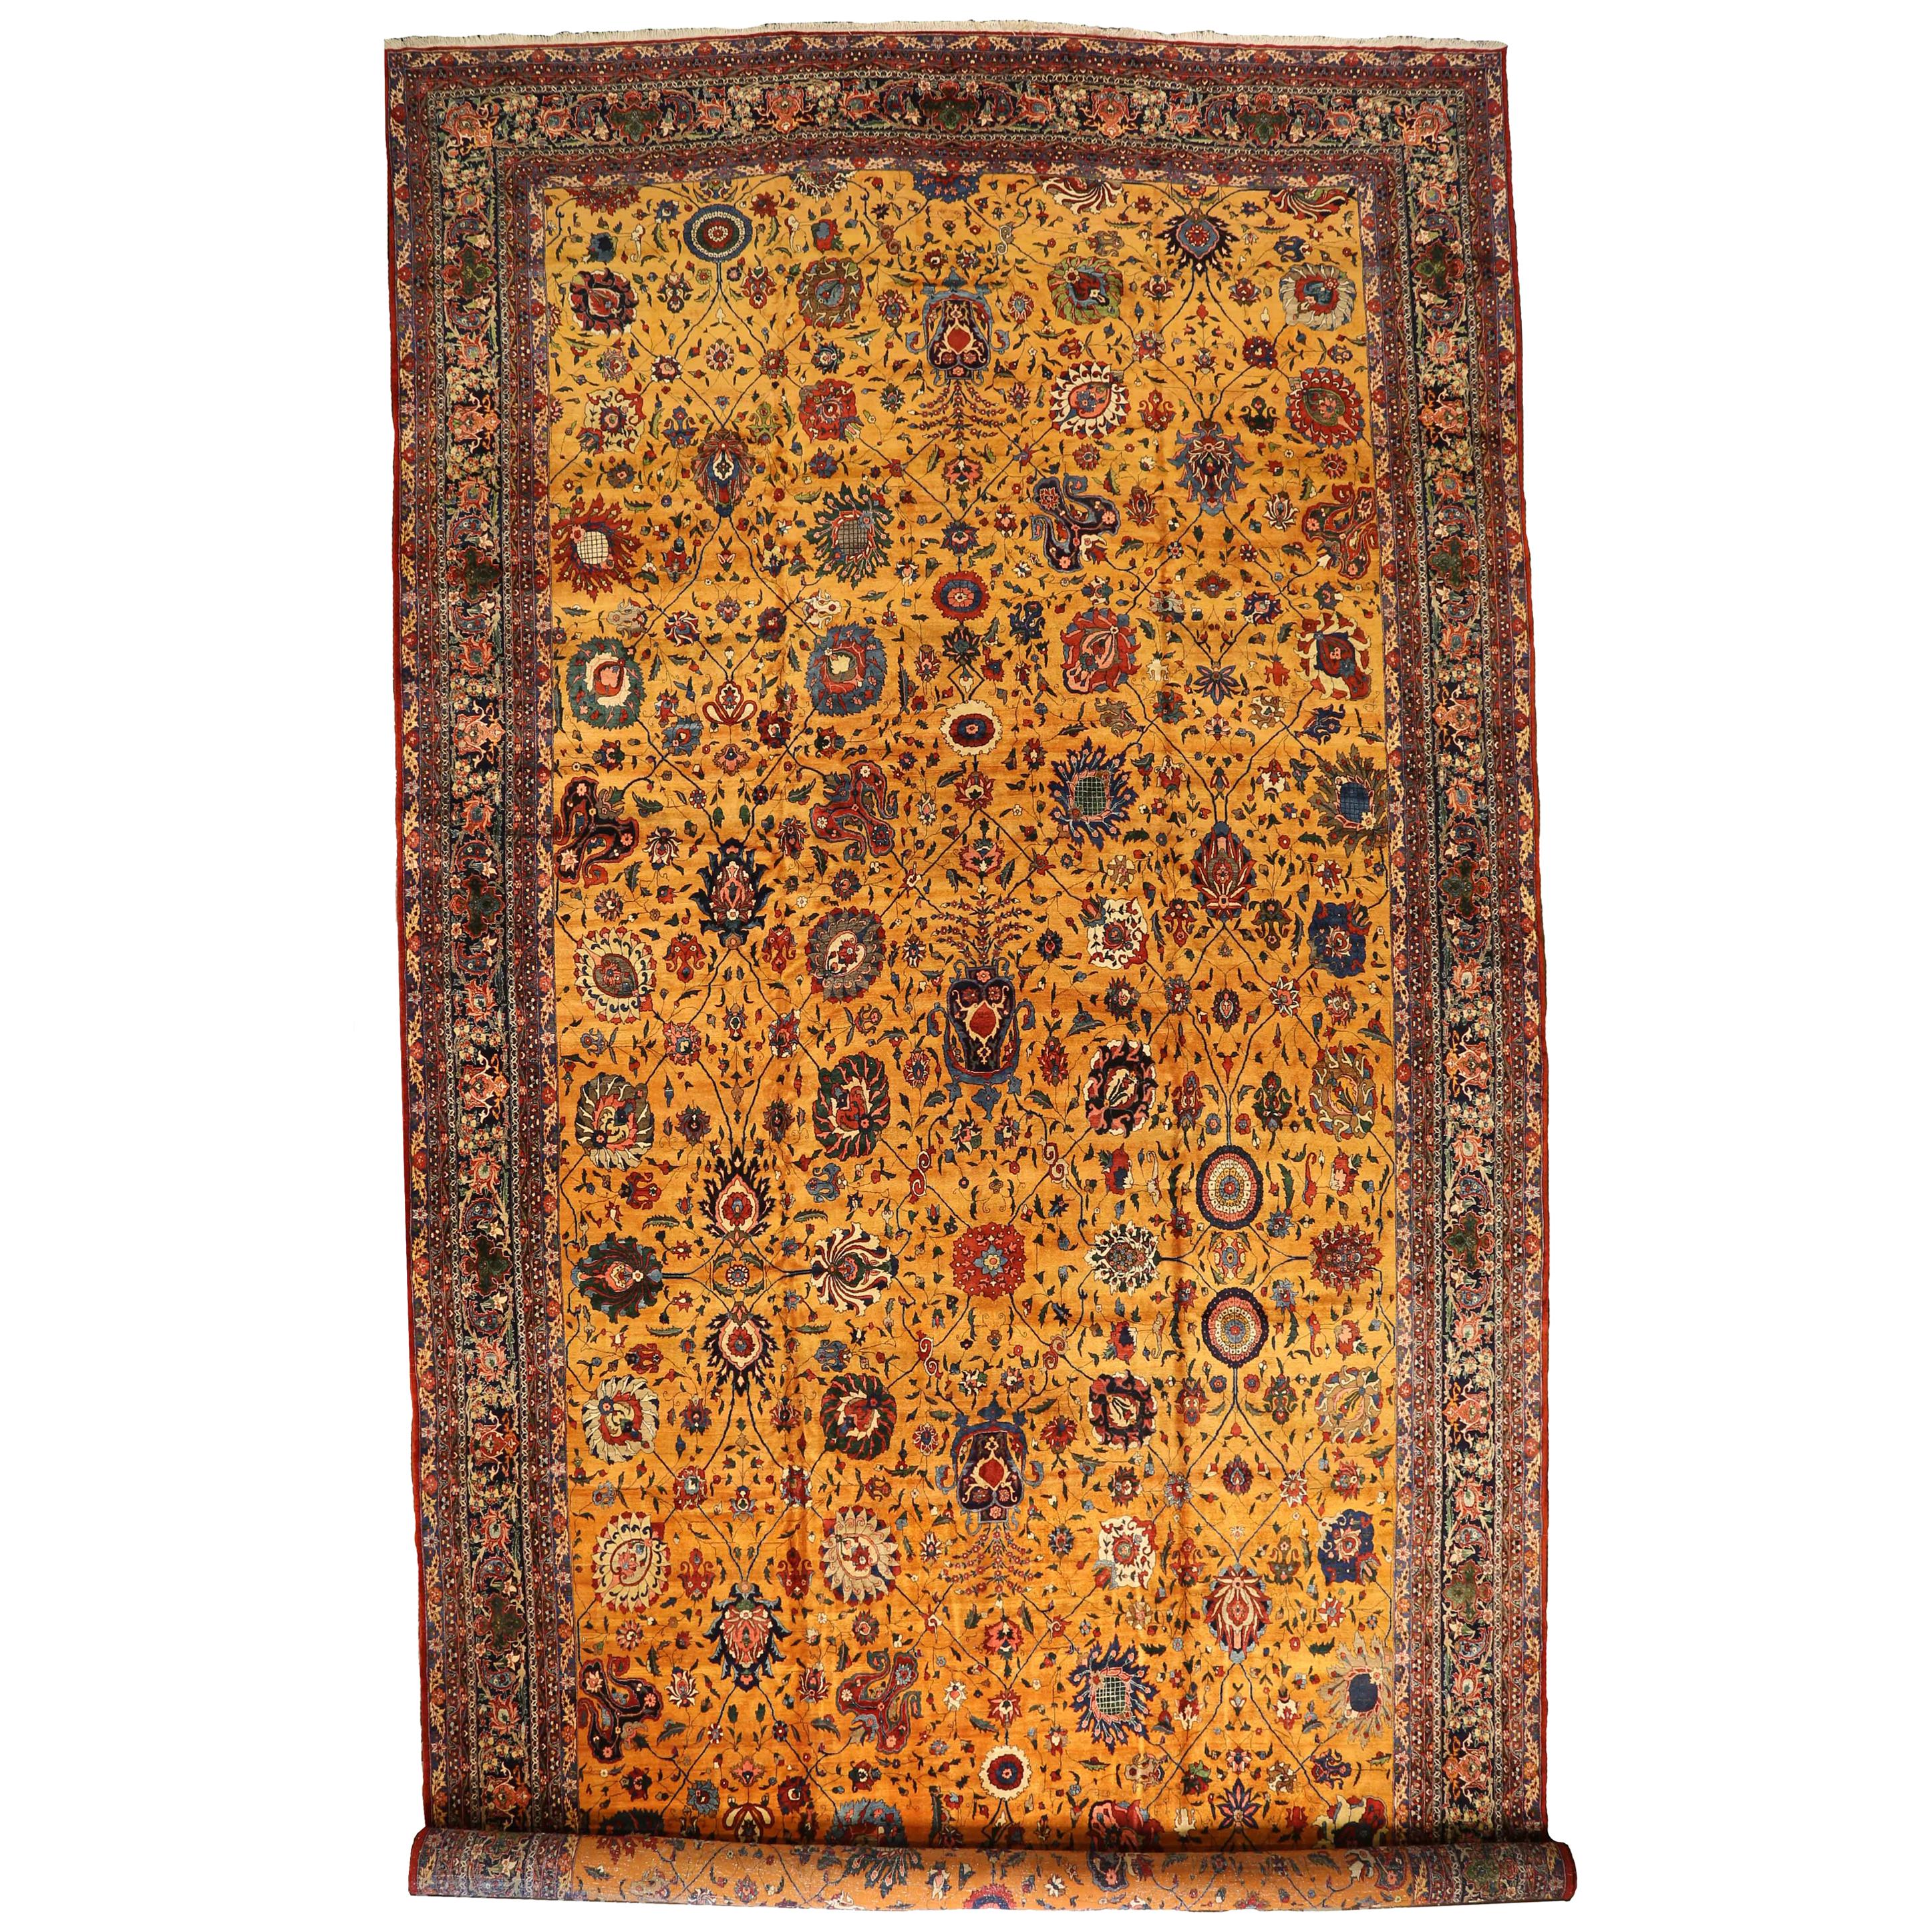 Antique Persian Isfahan Rug with Golden Field and Floral Details, circa 1910s For Sale